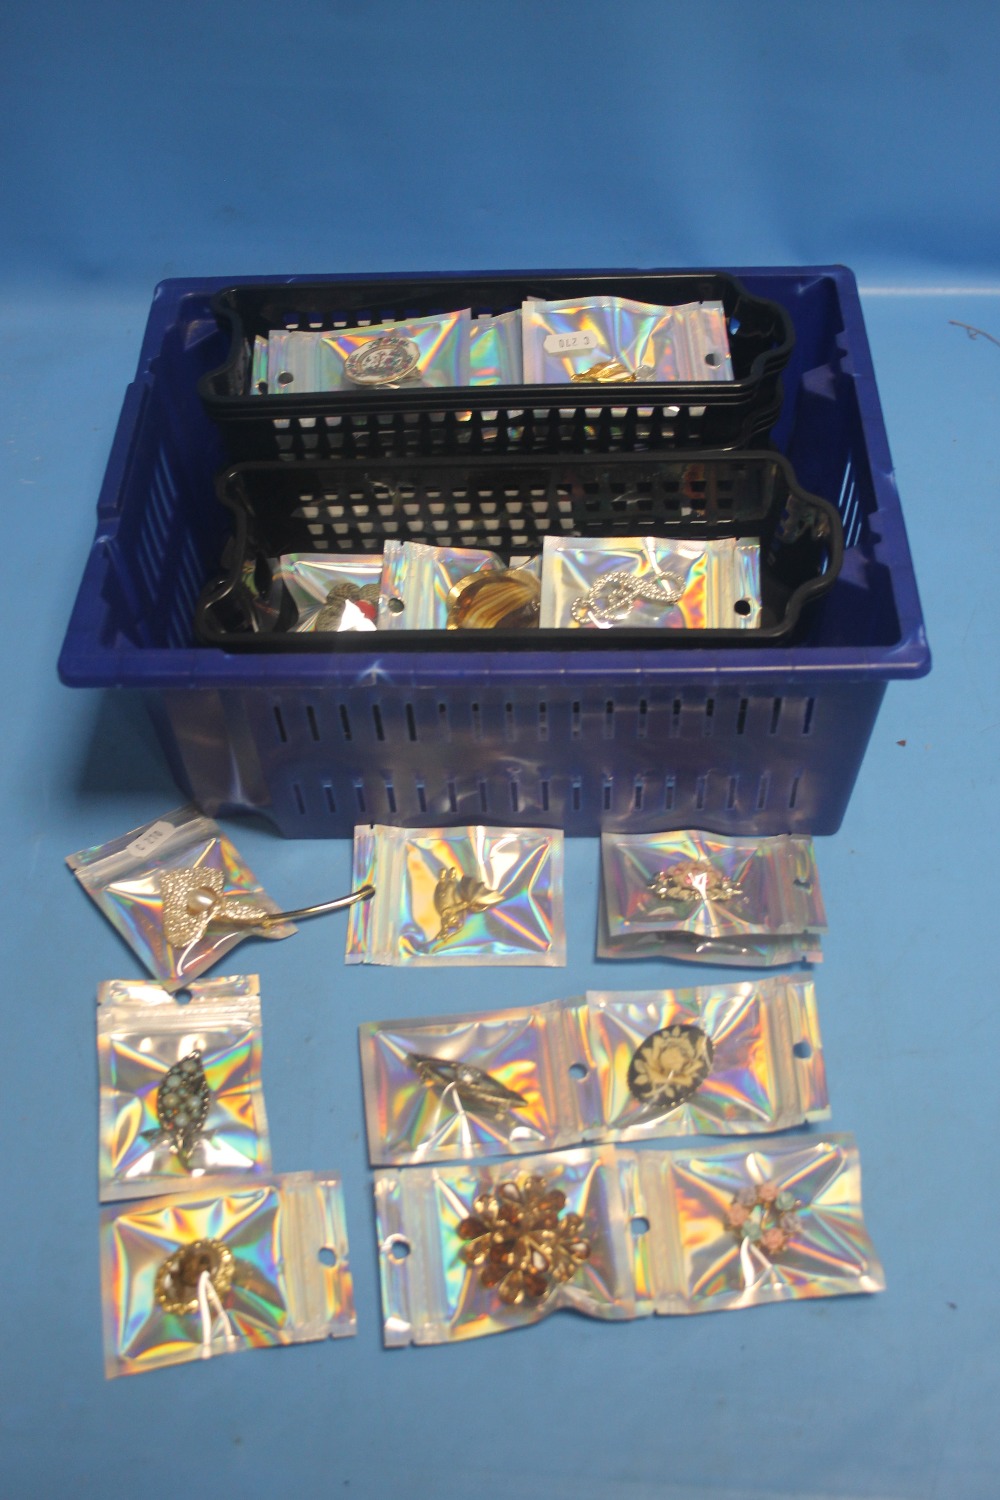 A LARGE QUANTITY OF COSTUME JEWELLERY - UNOPENED BROOCHES